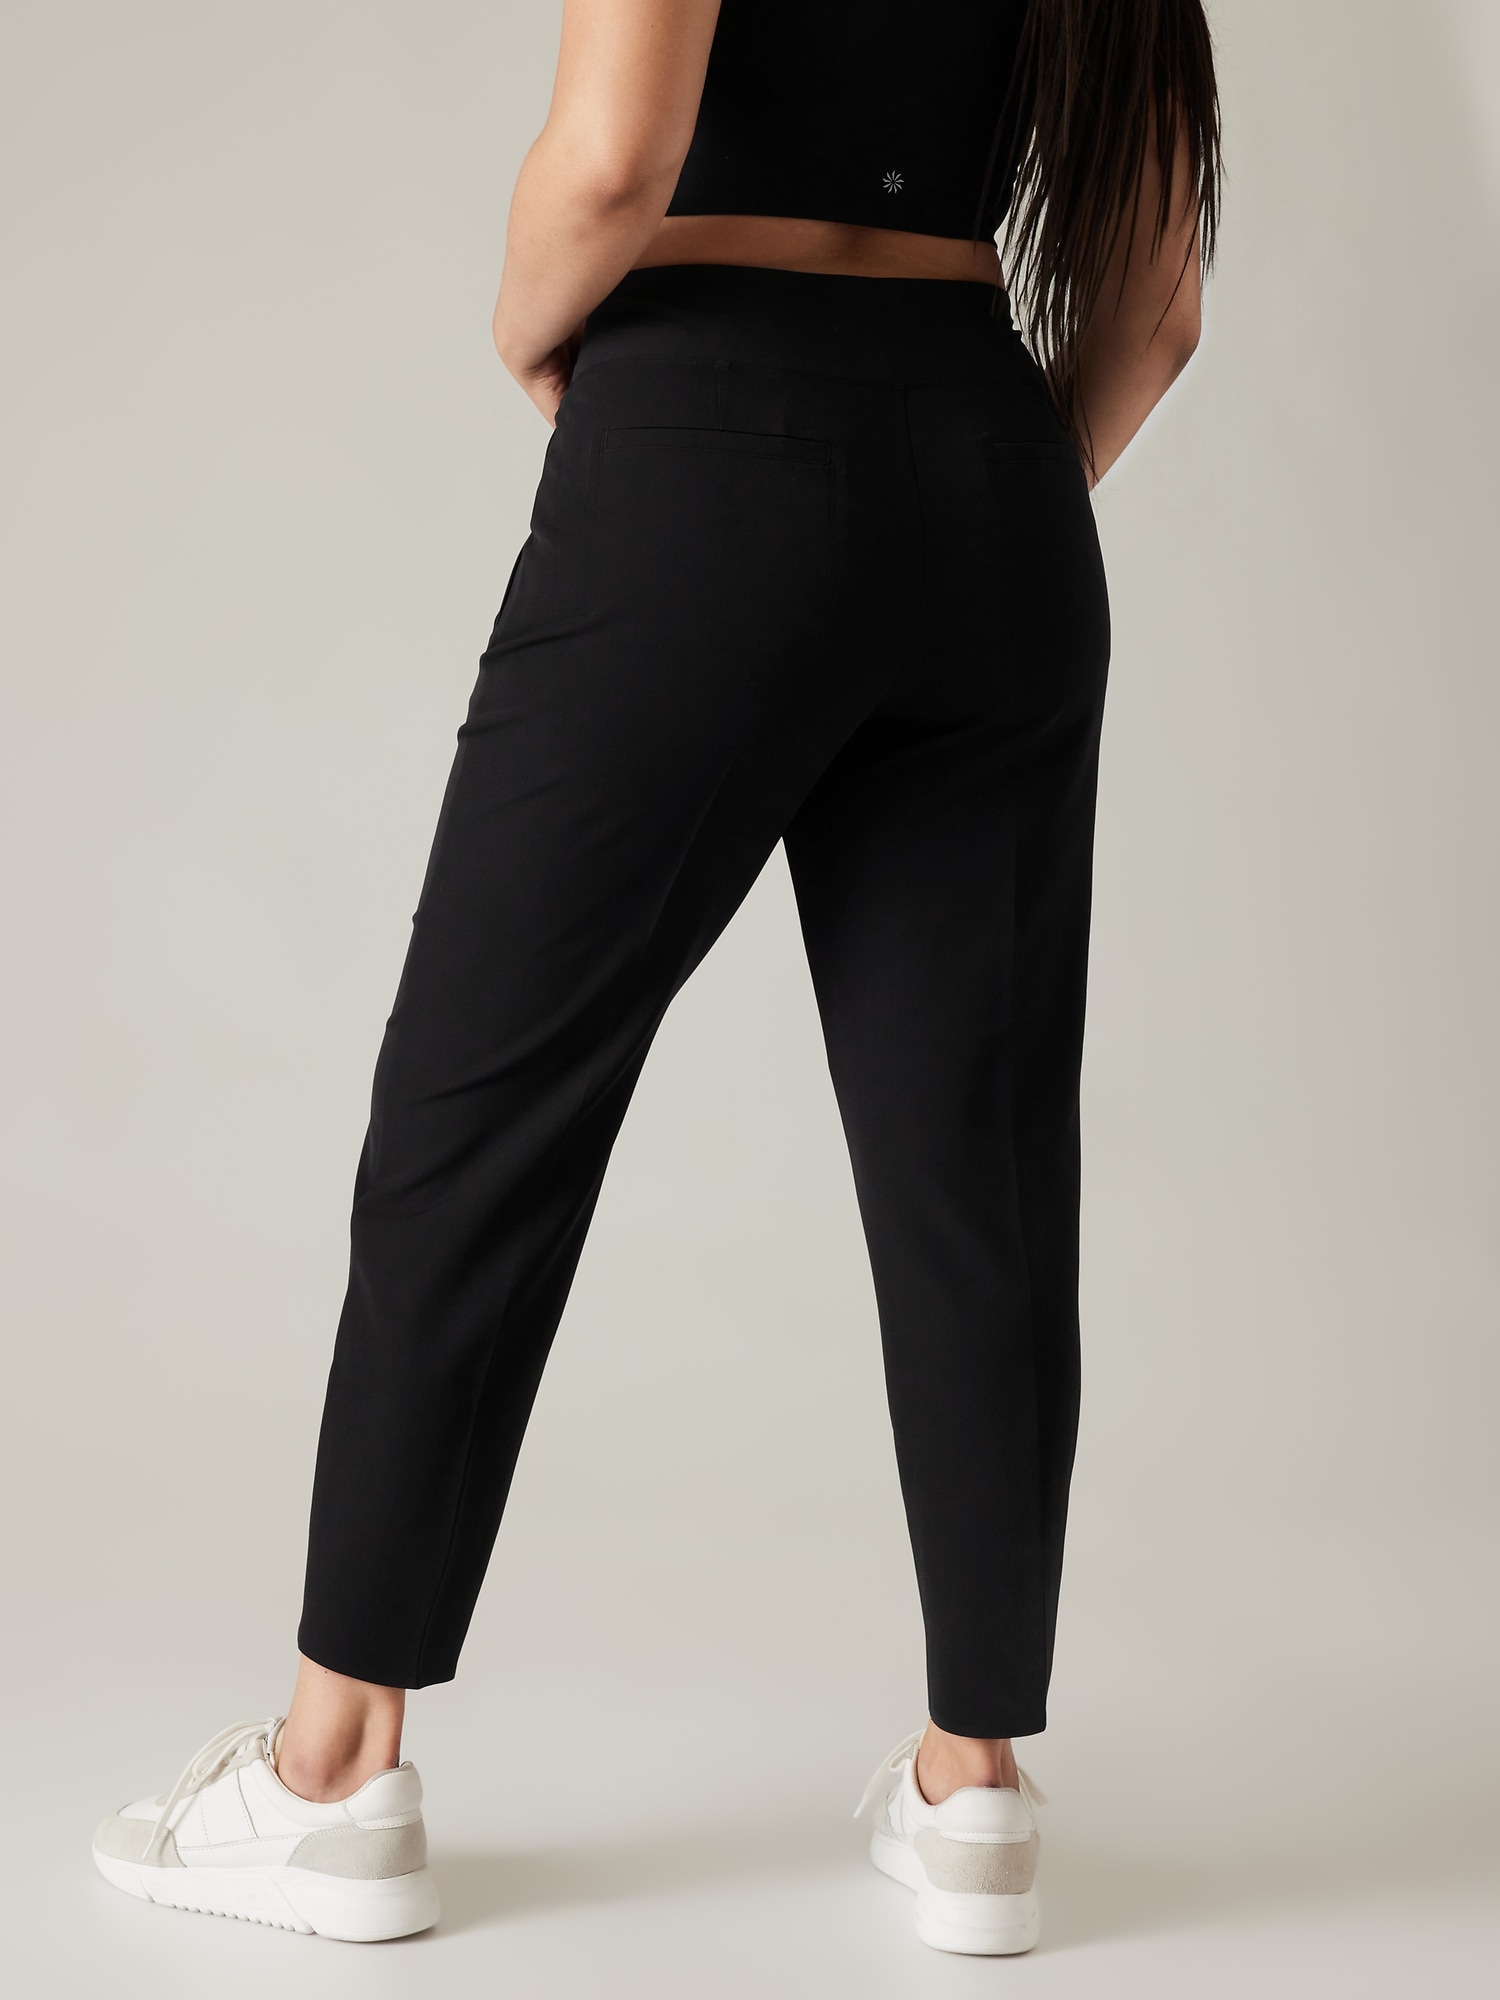 Lululemon Women's On The Move Pant - Black - Size 8 for Sale in